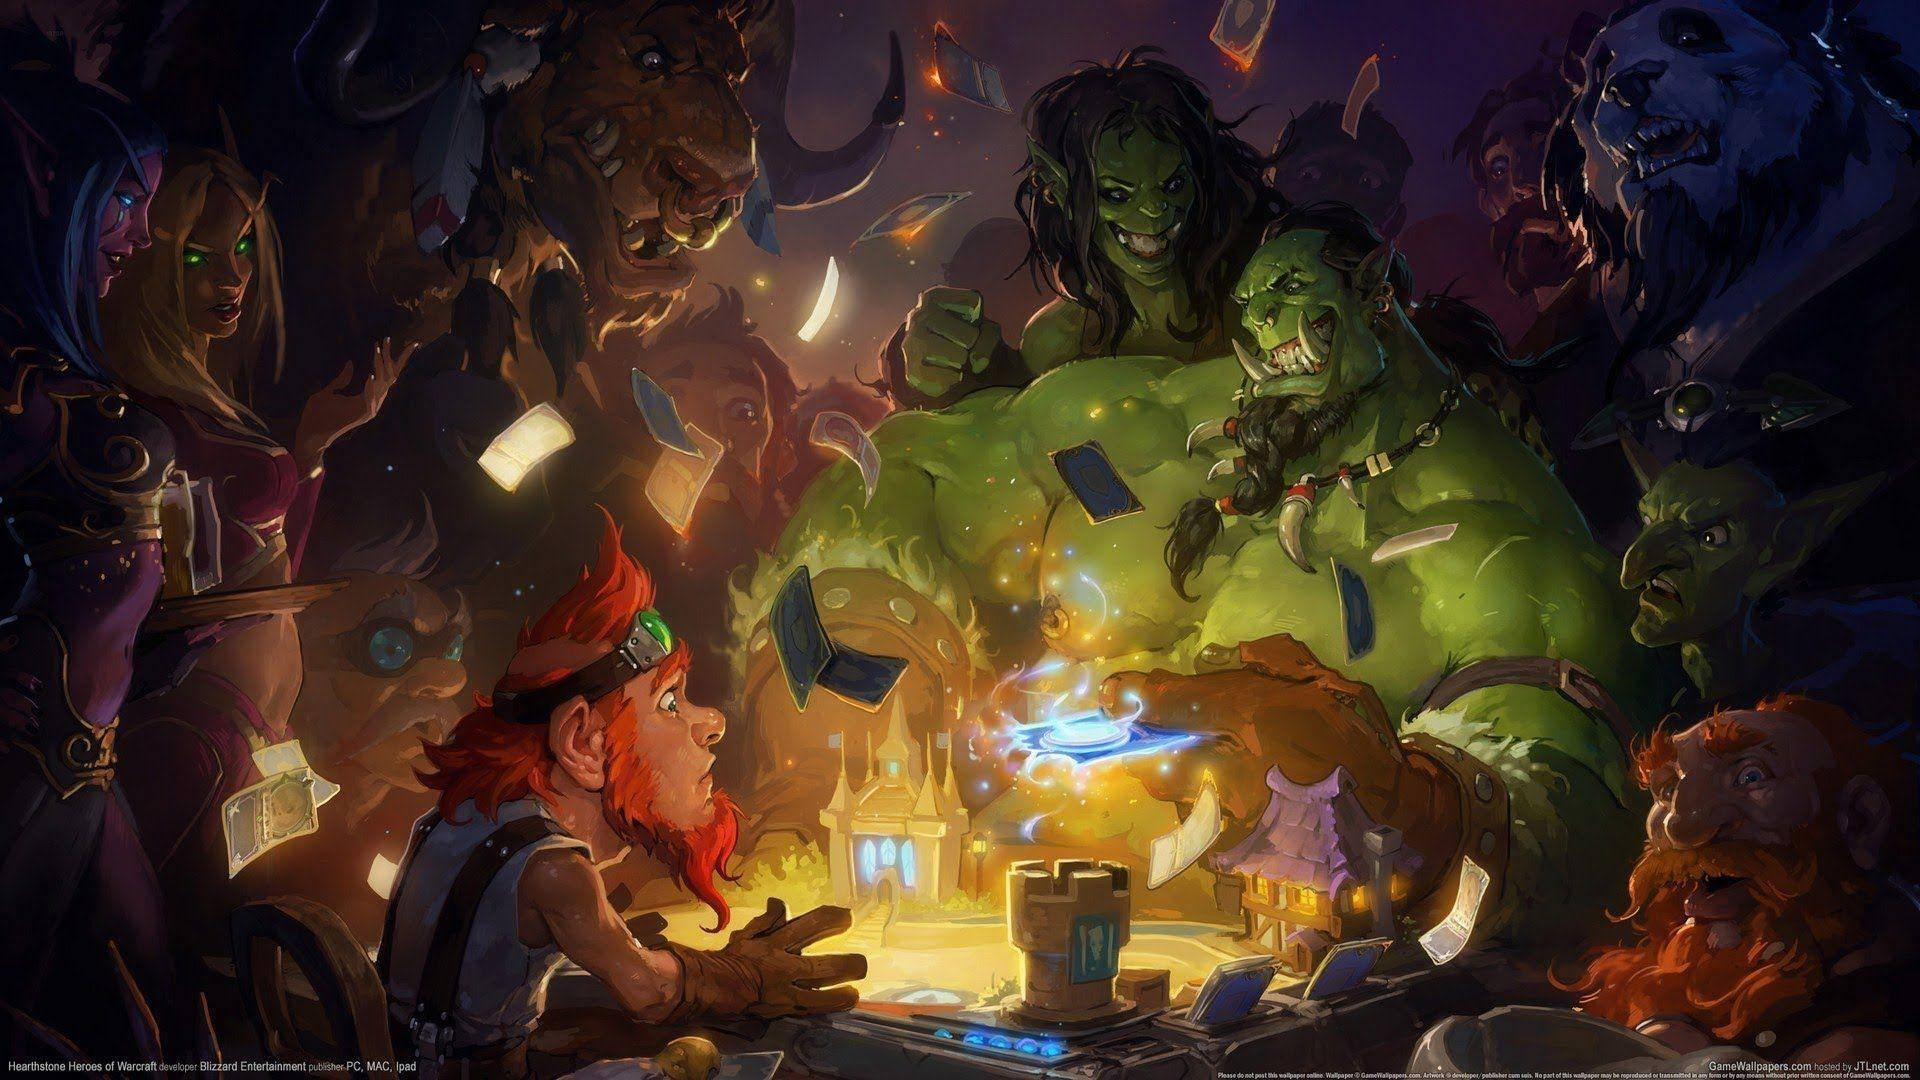 Dynamic Battle Scene From Hearthstone: Heroes Of Warcraft Game In 2560 X 1440 Resolution